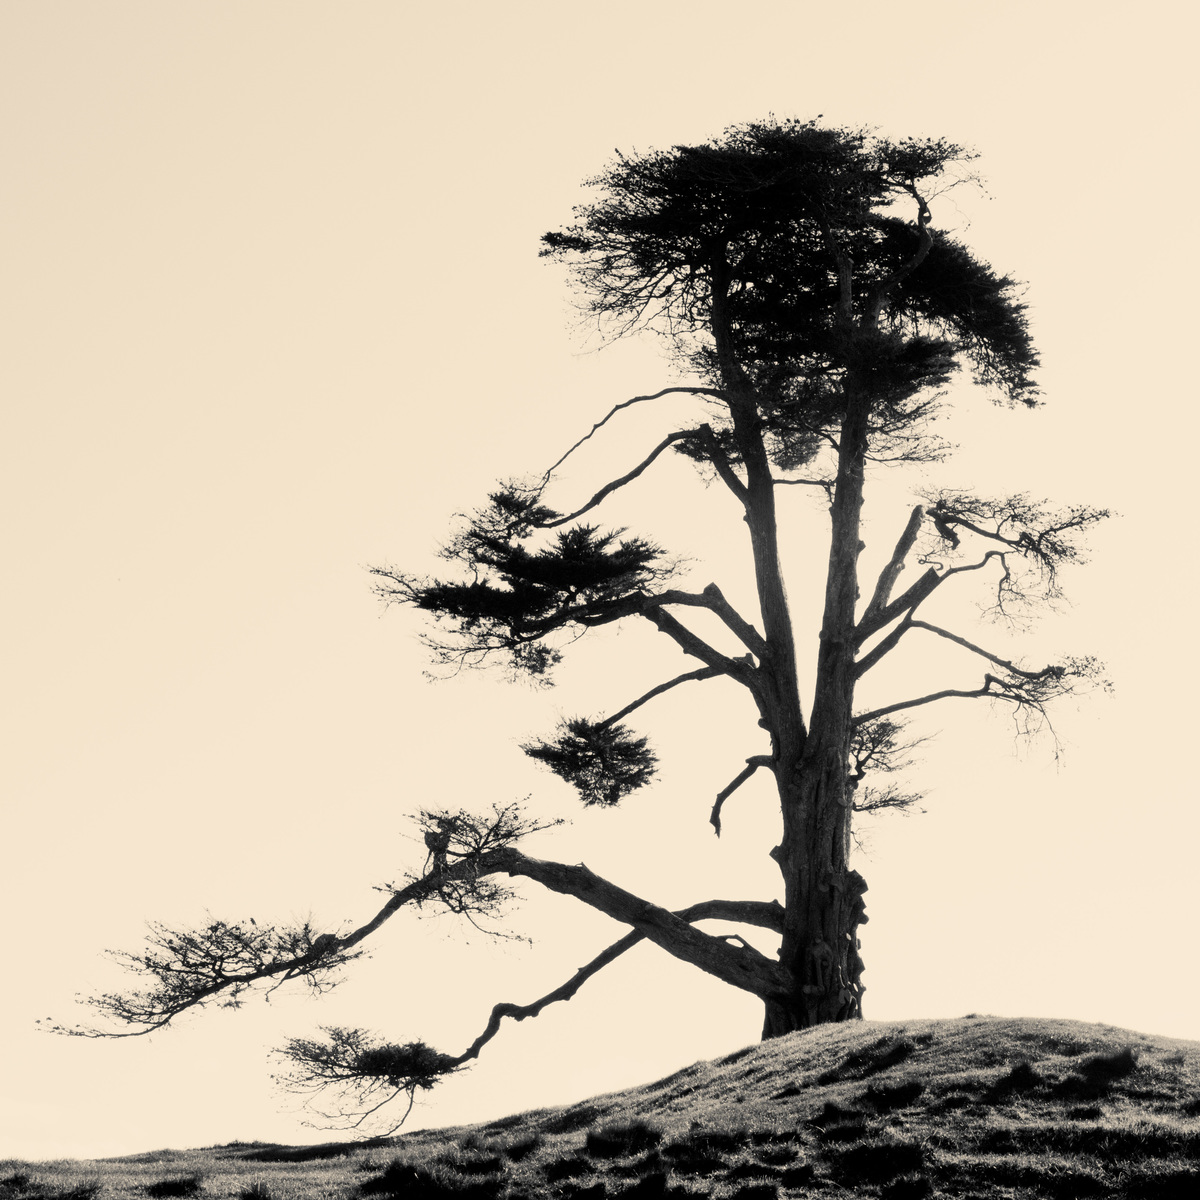 Lone Tree, One Tree Hill, Auckland